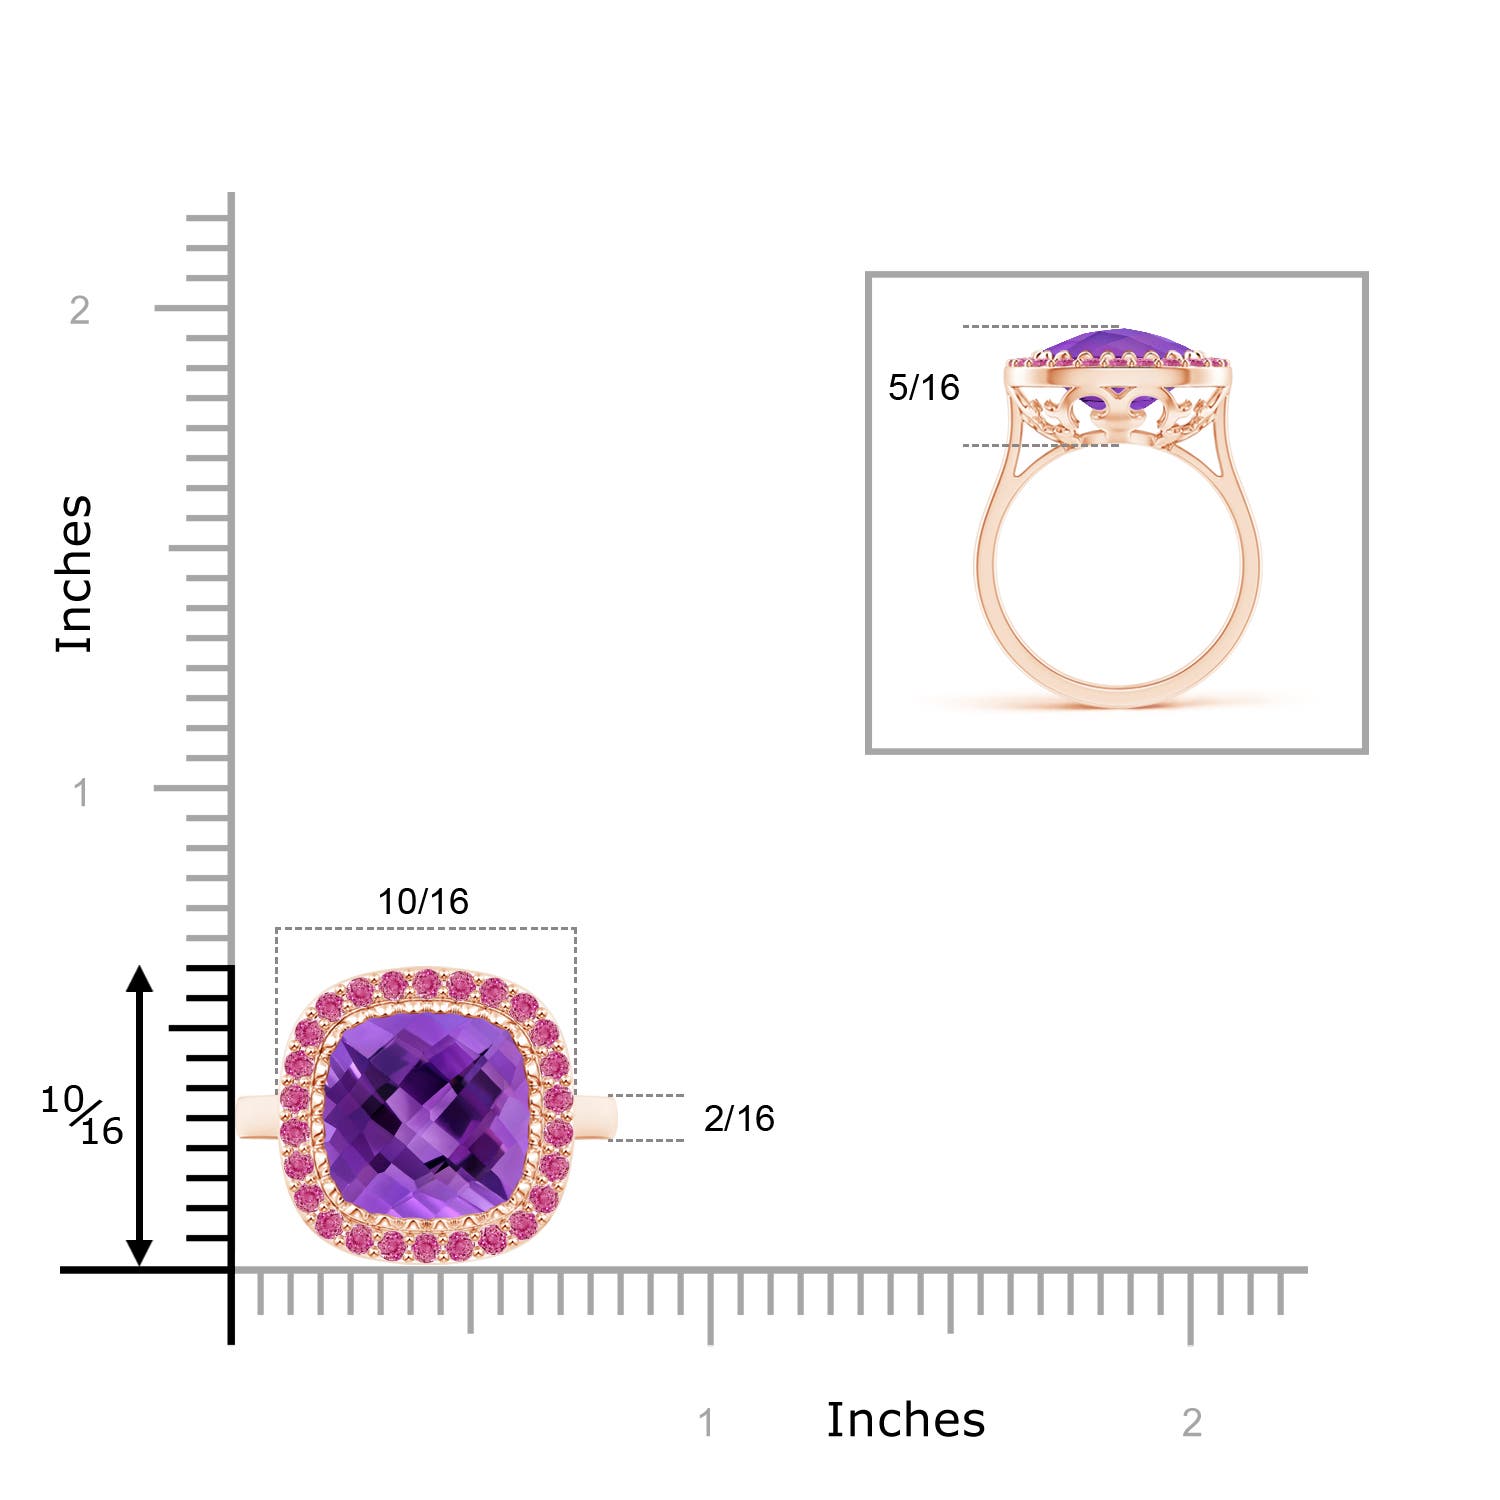 AAA - Amethyst / 4.65 CT / 14 KT Rose Gold